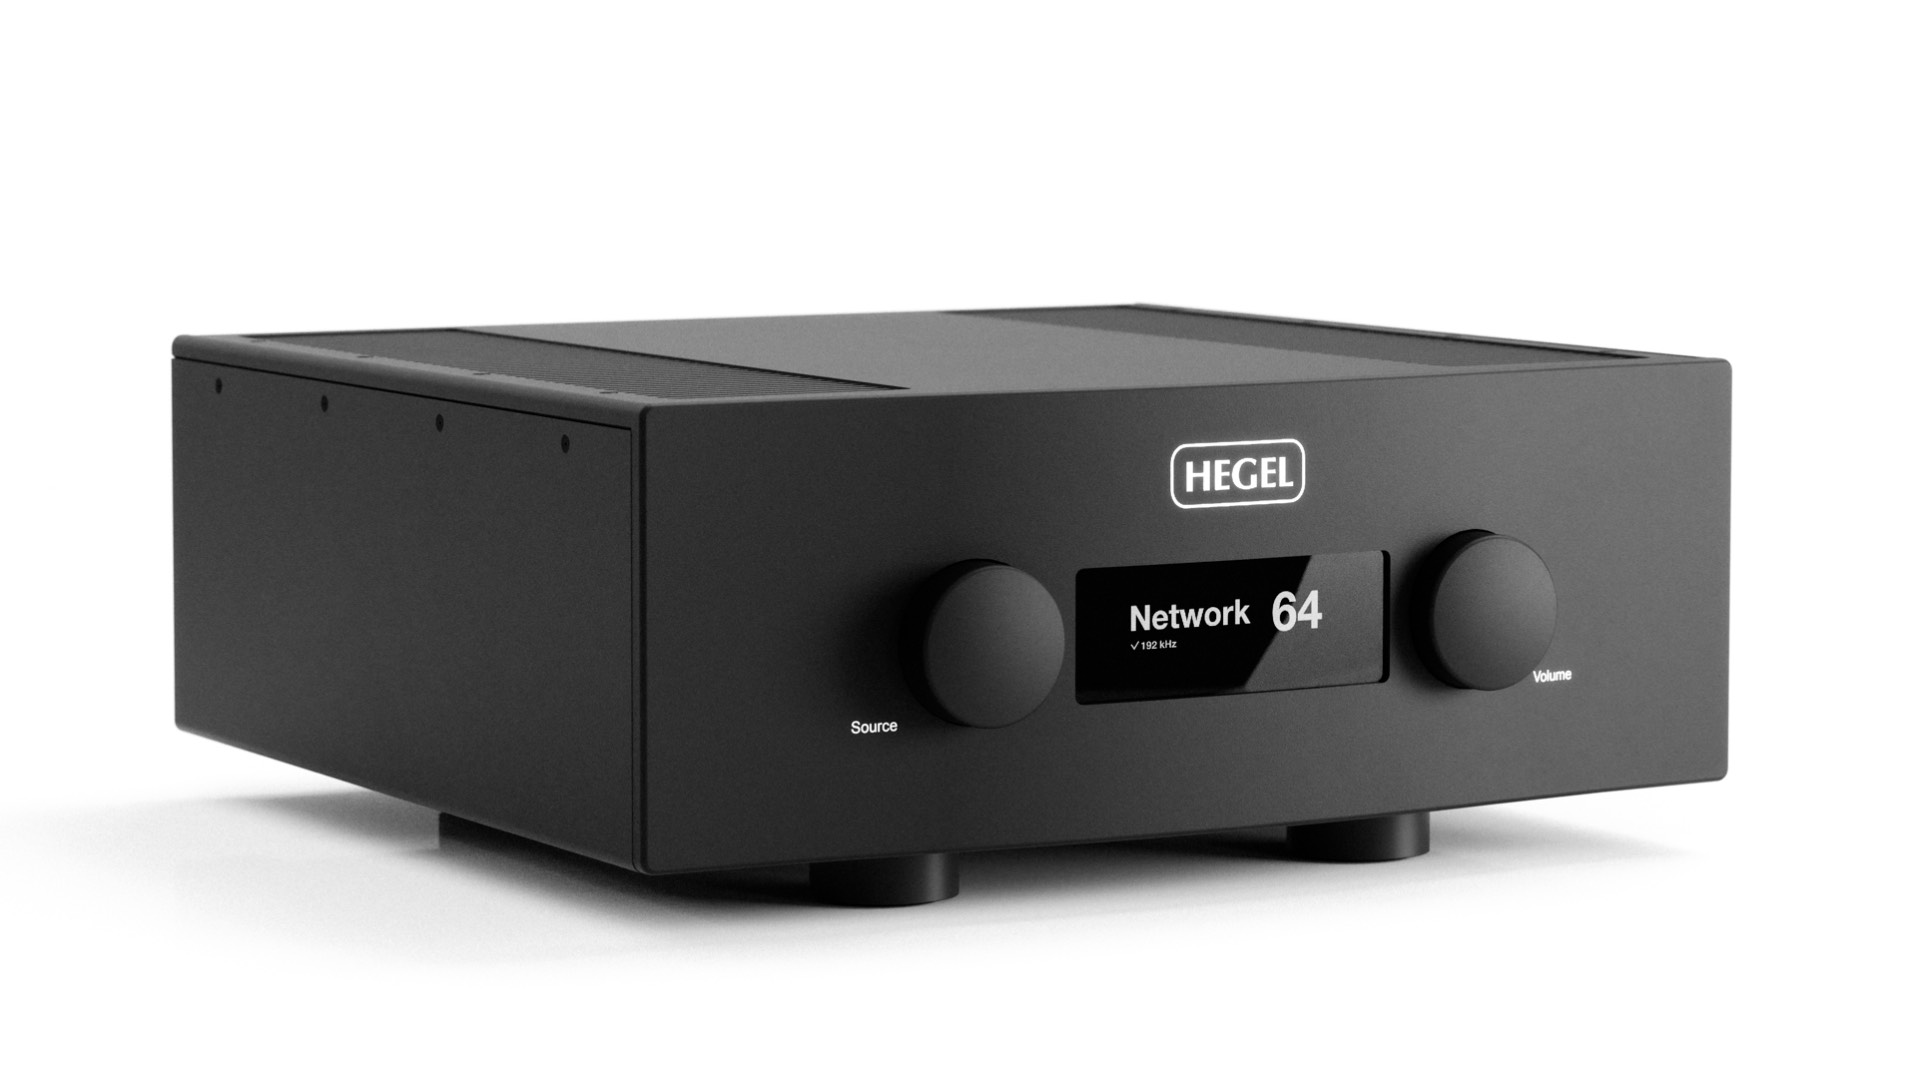 The H600 comes as the successor to the H590 and weighs around 22kg. (Image Credit: Hegel)